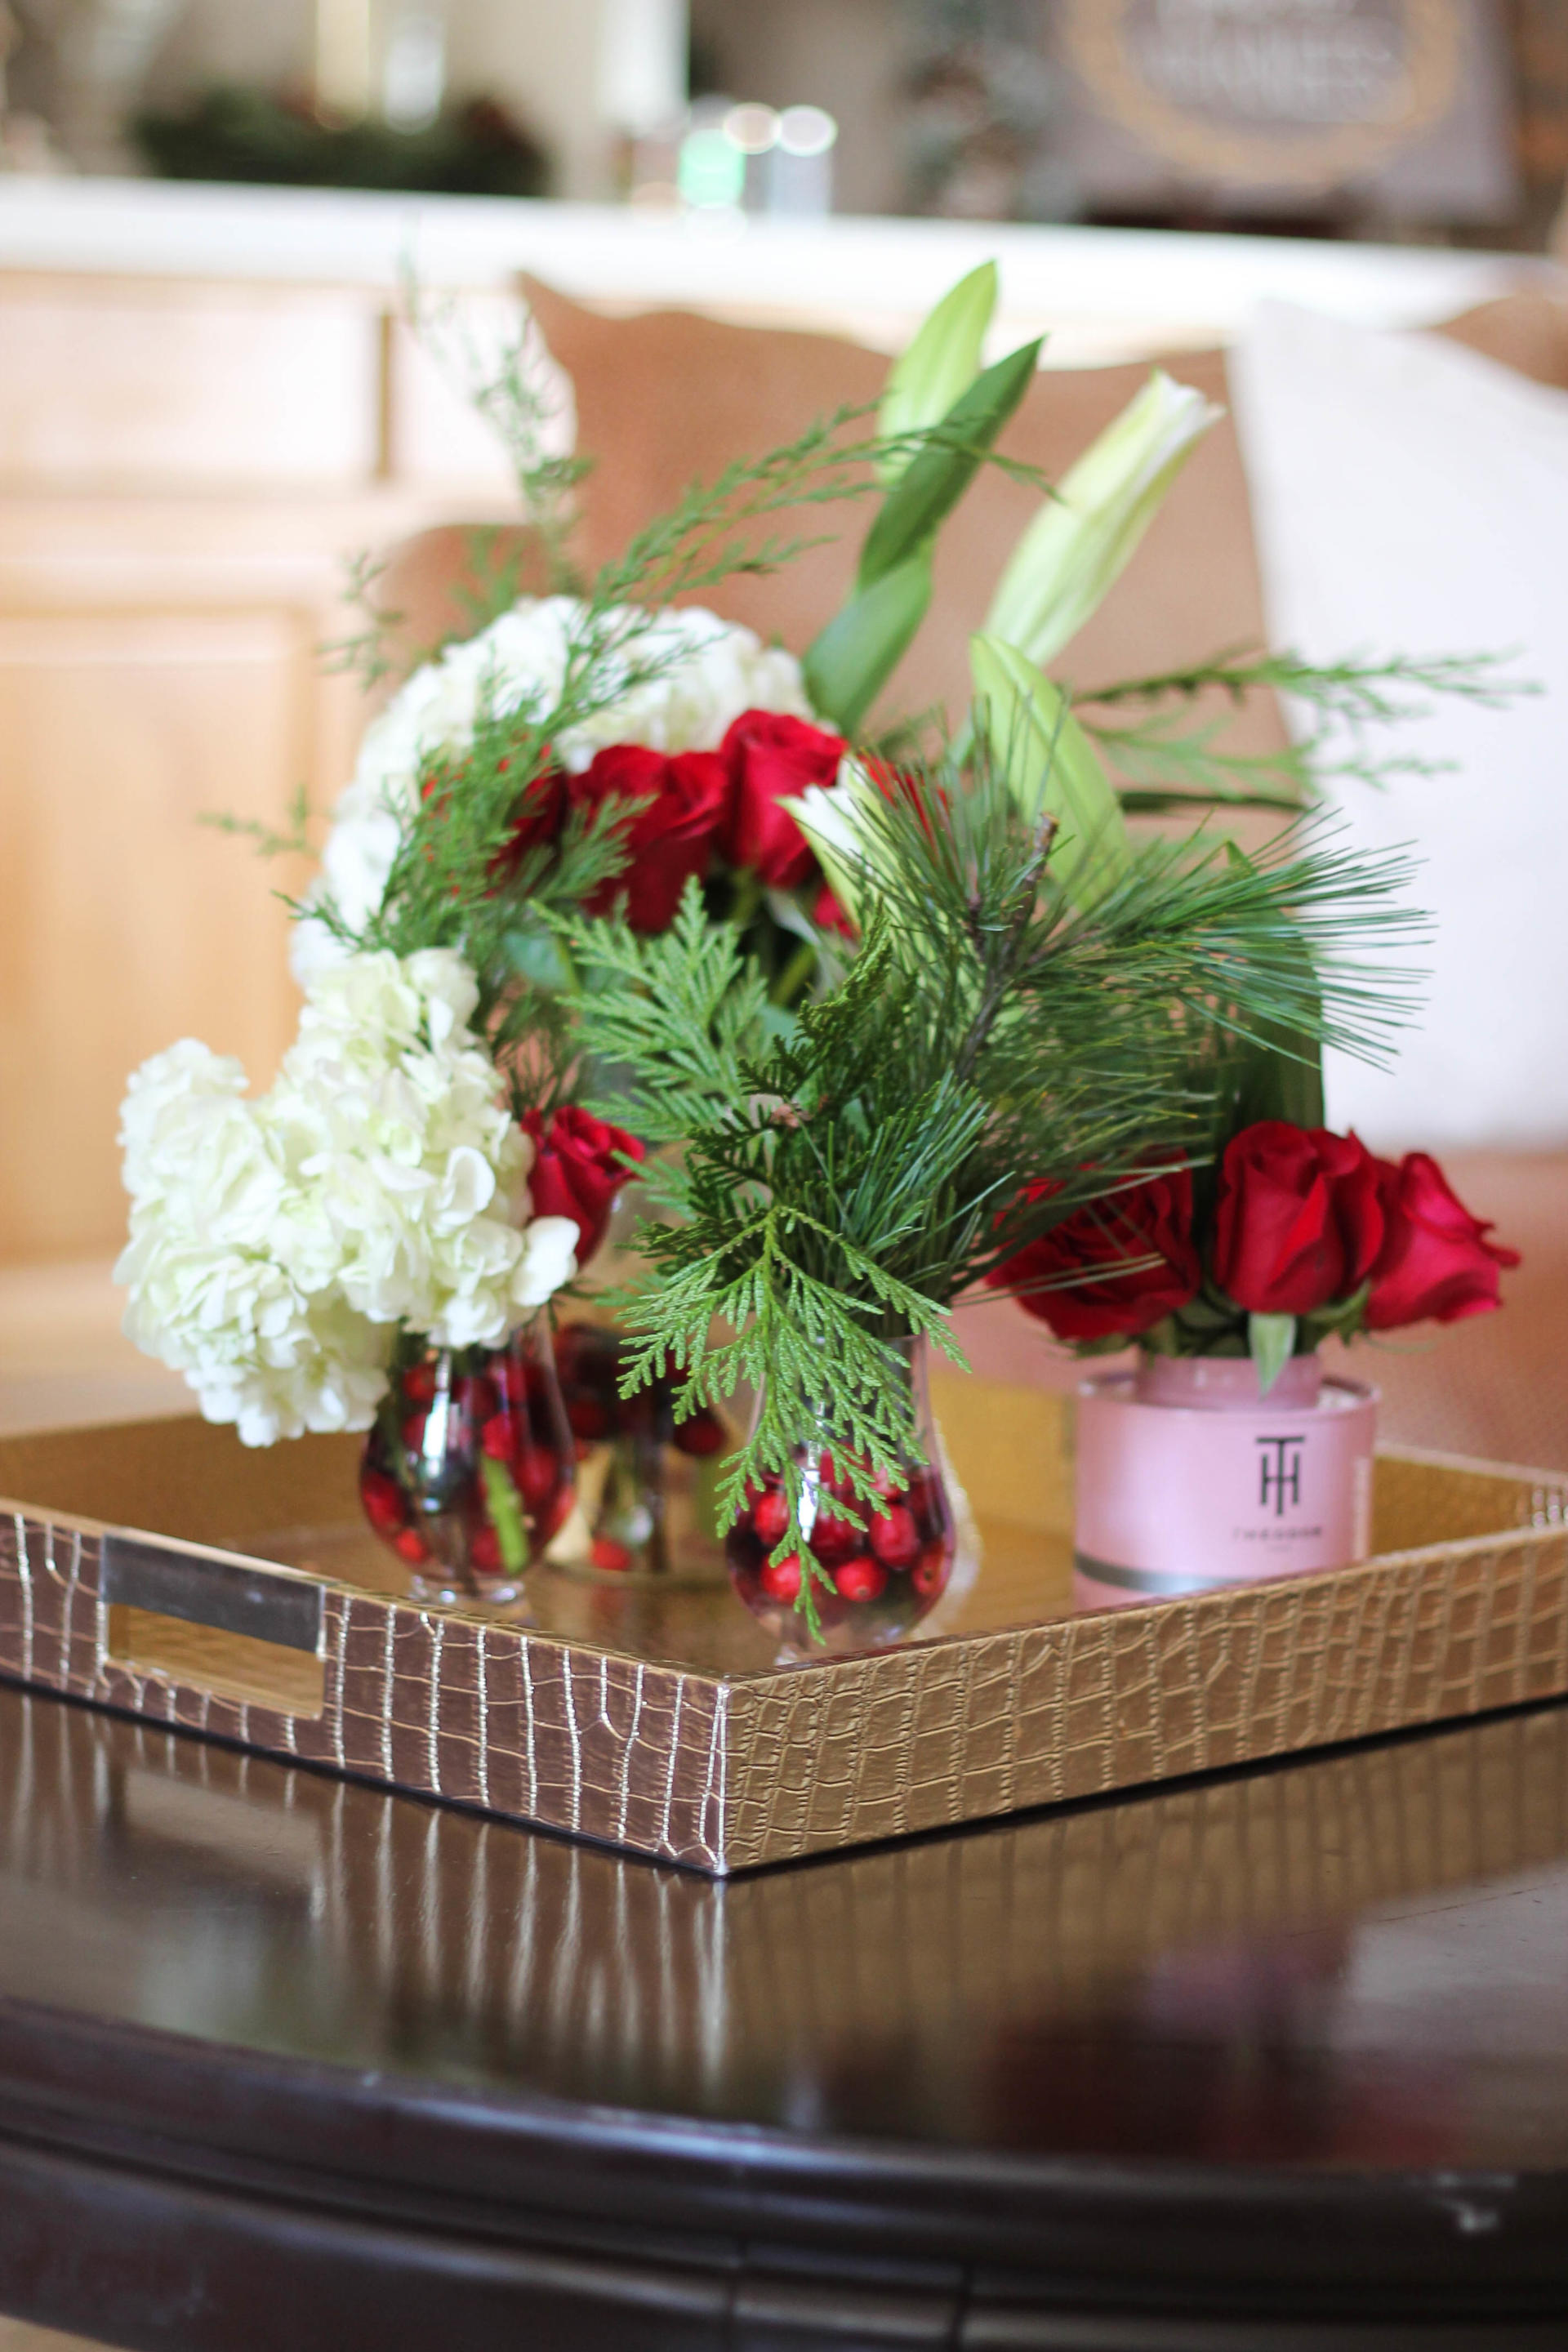 Christmas Flowers by New York style blogger Style Waltz